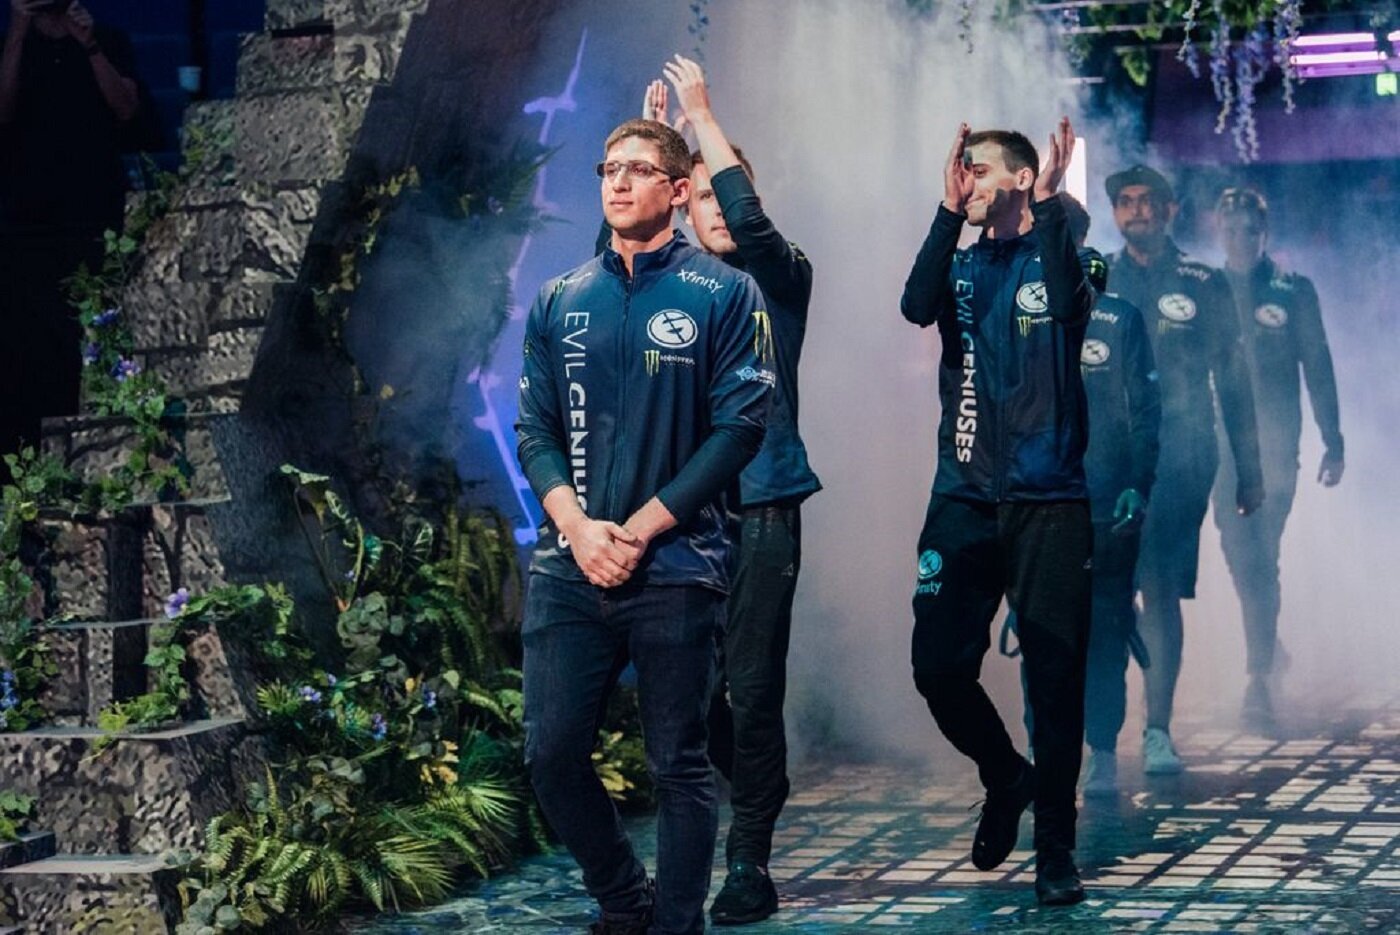 It was a hard fought victory for Evil Geniuses in their TI9 upper bracket match versus Team Secret. (Image via Valve)